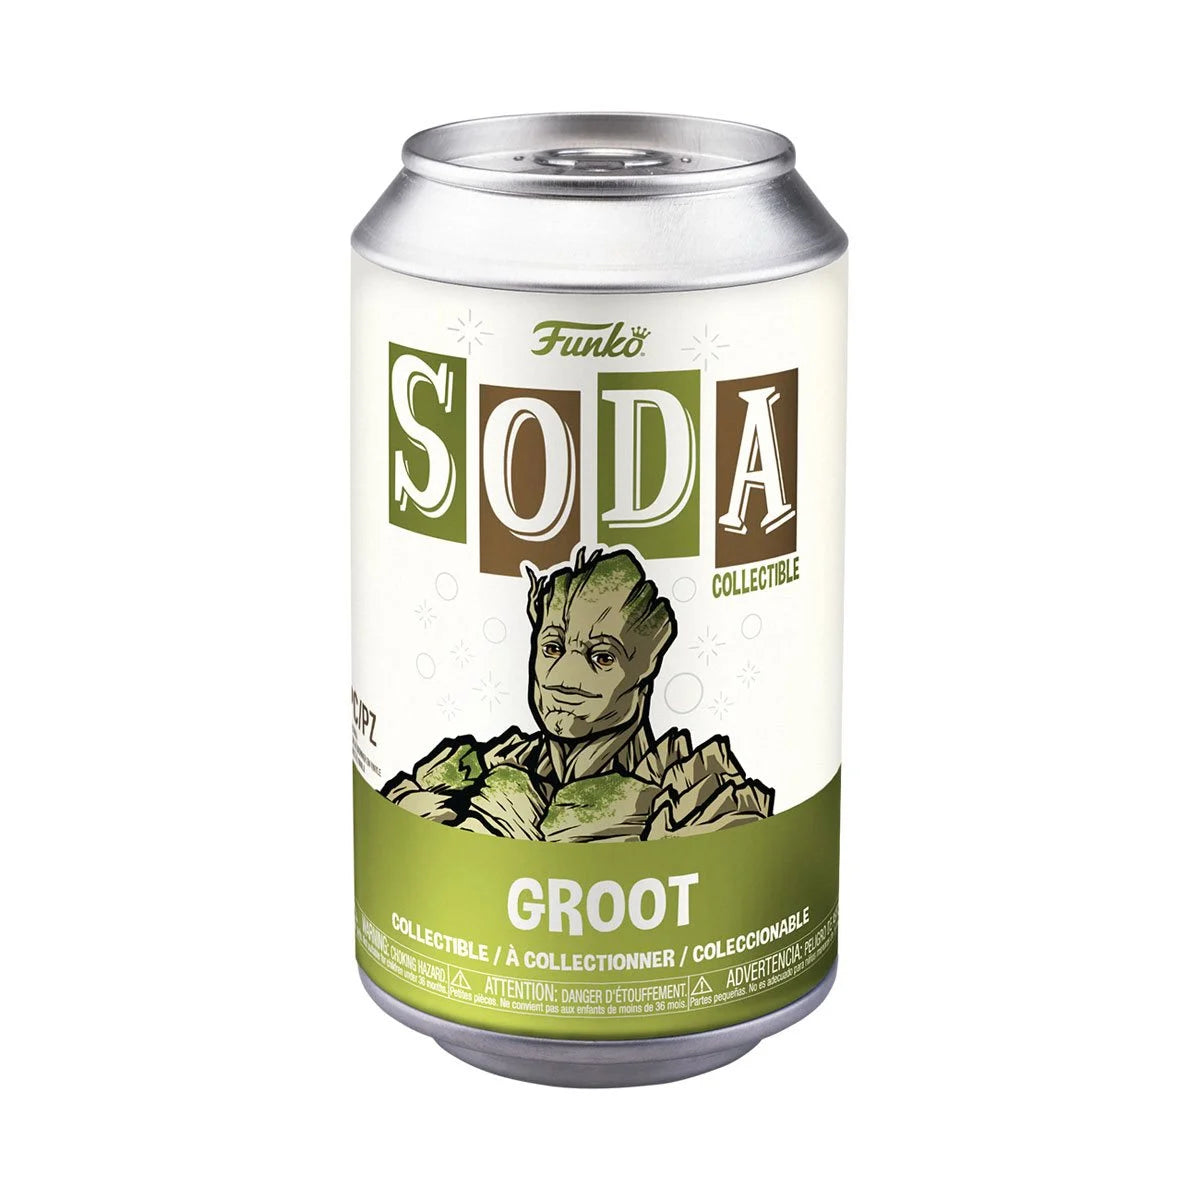 Groot Guardians of the Galaxy Volume 3 Funko Vinyl Soda w/ Chance of chase!